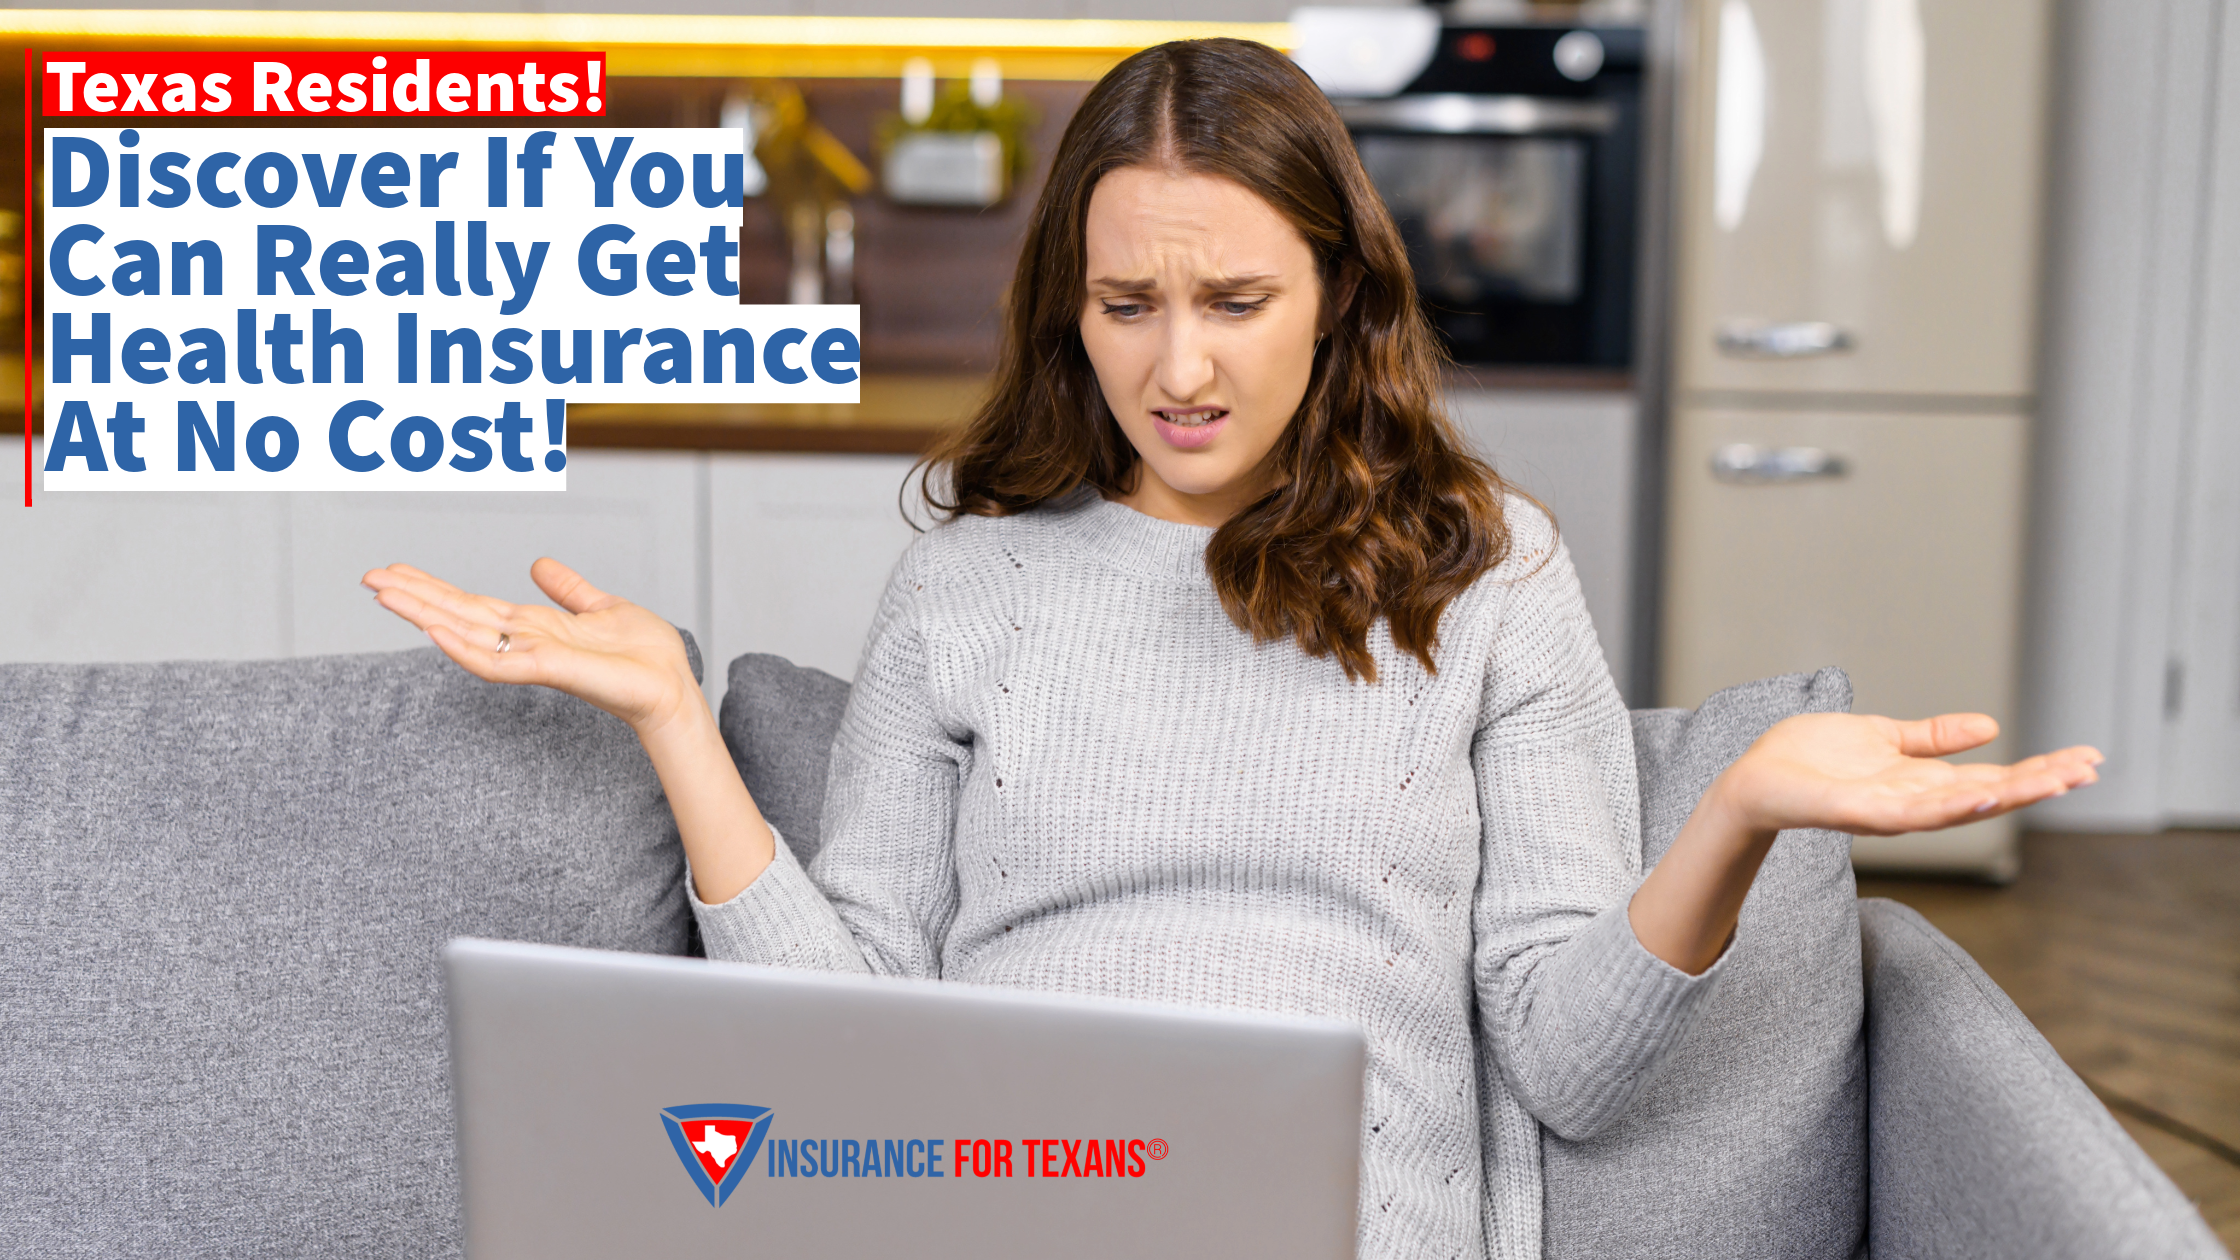 Texas Residents: Discover If You Can Really Get Health Insurance at No Cost!